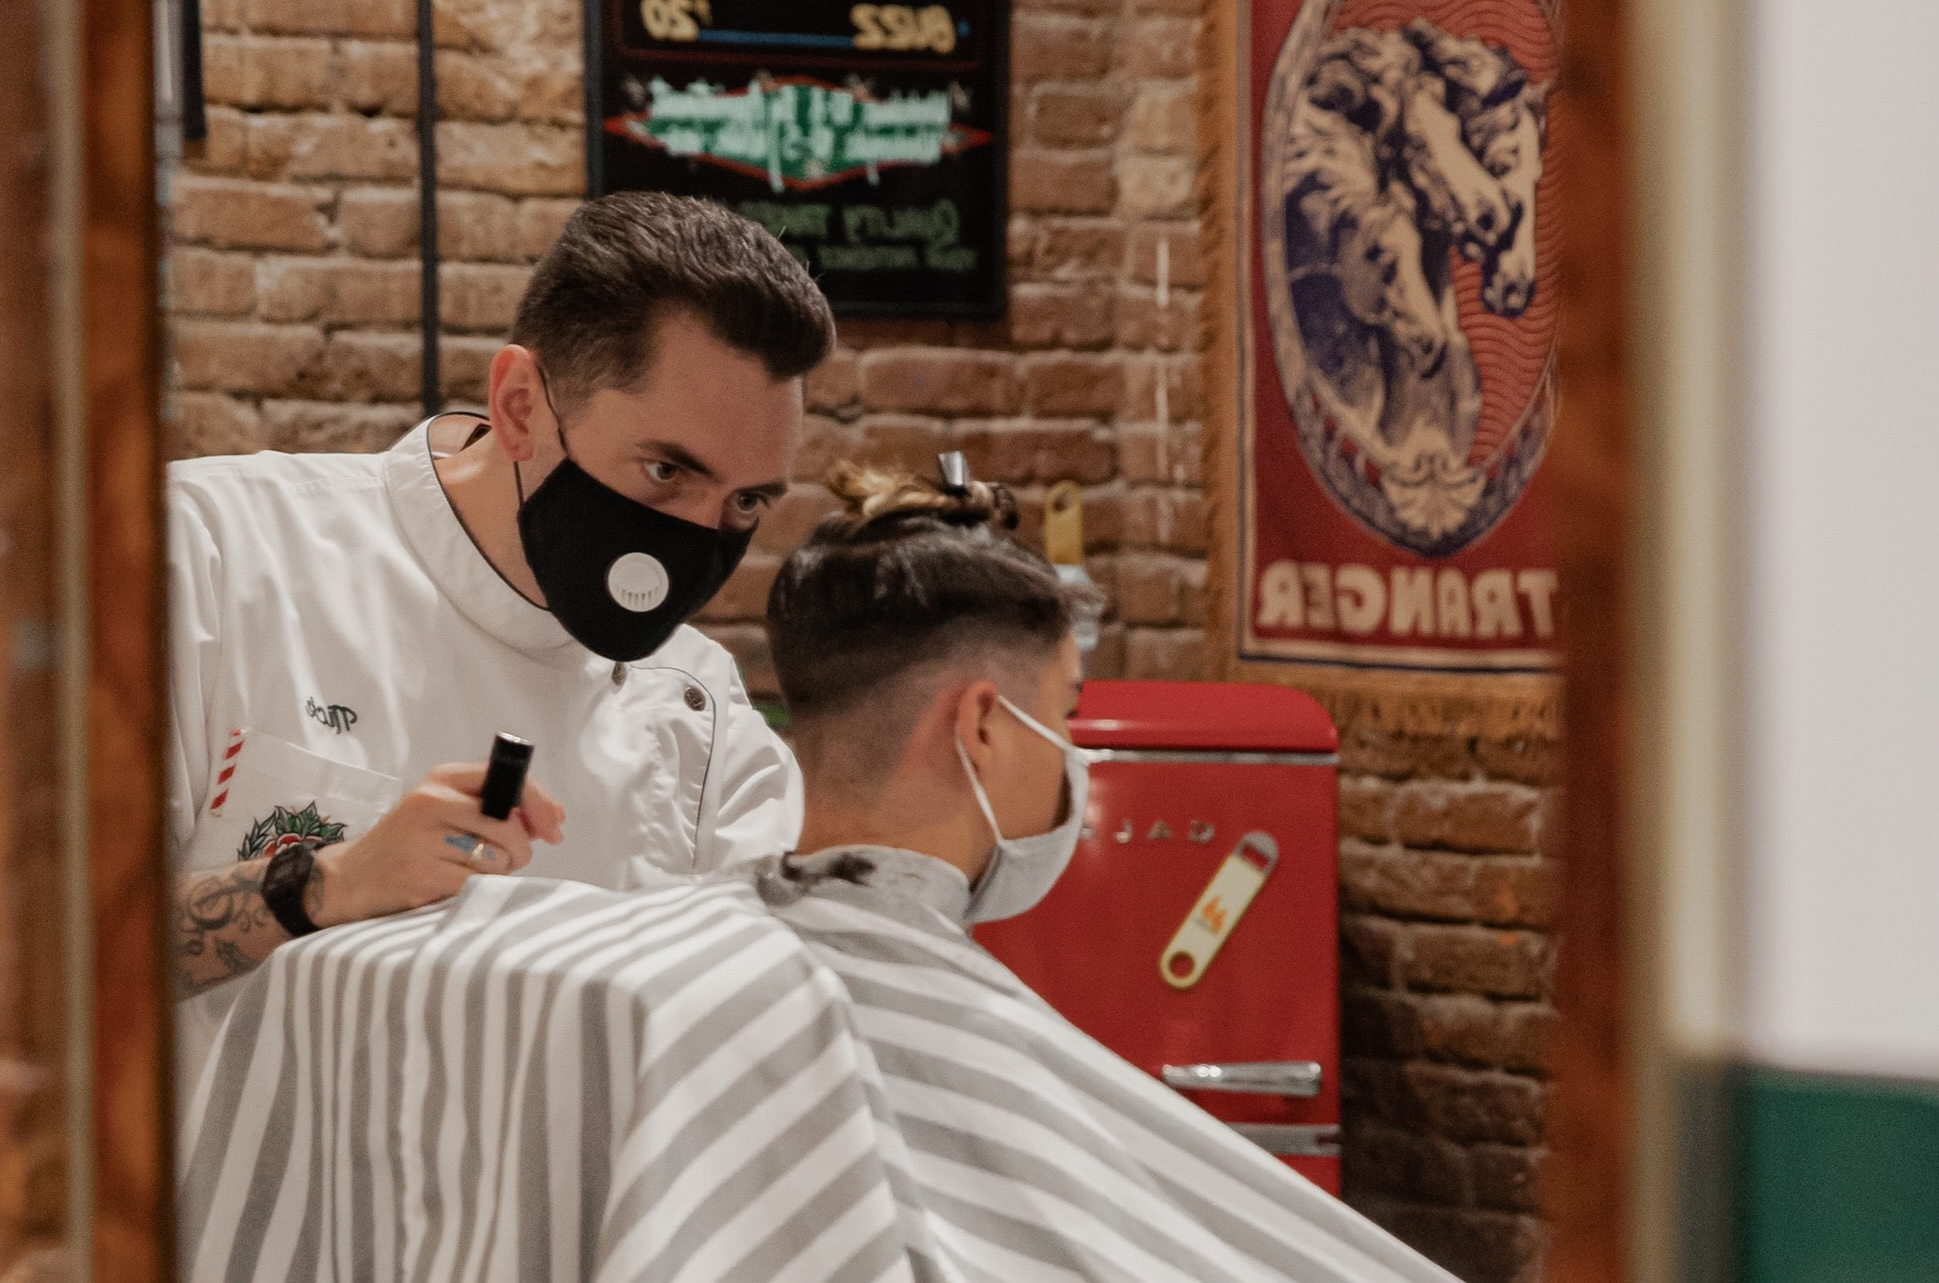 Hairdresser is cutting the hair of his client – both wear a face mask